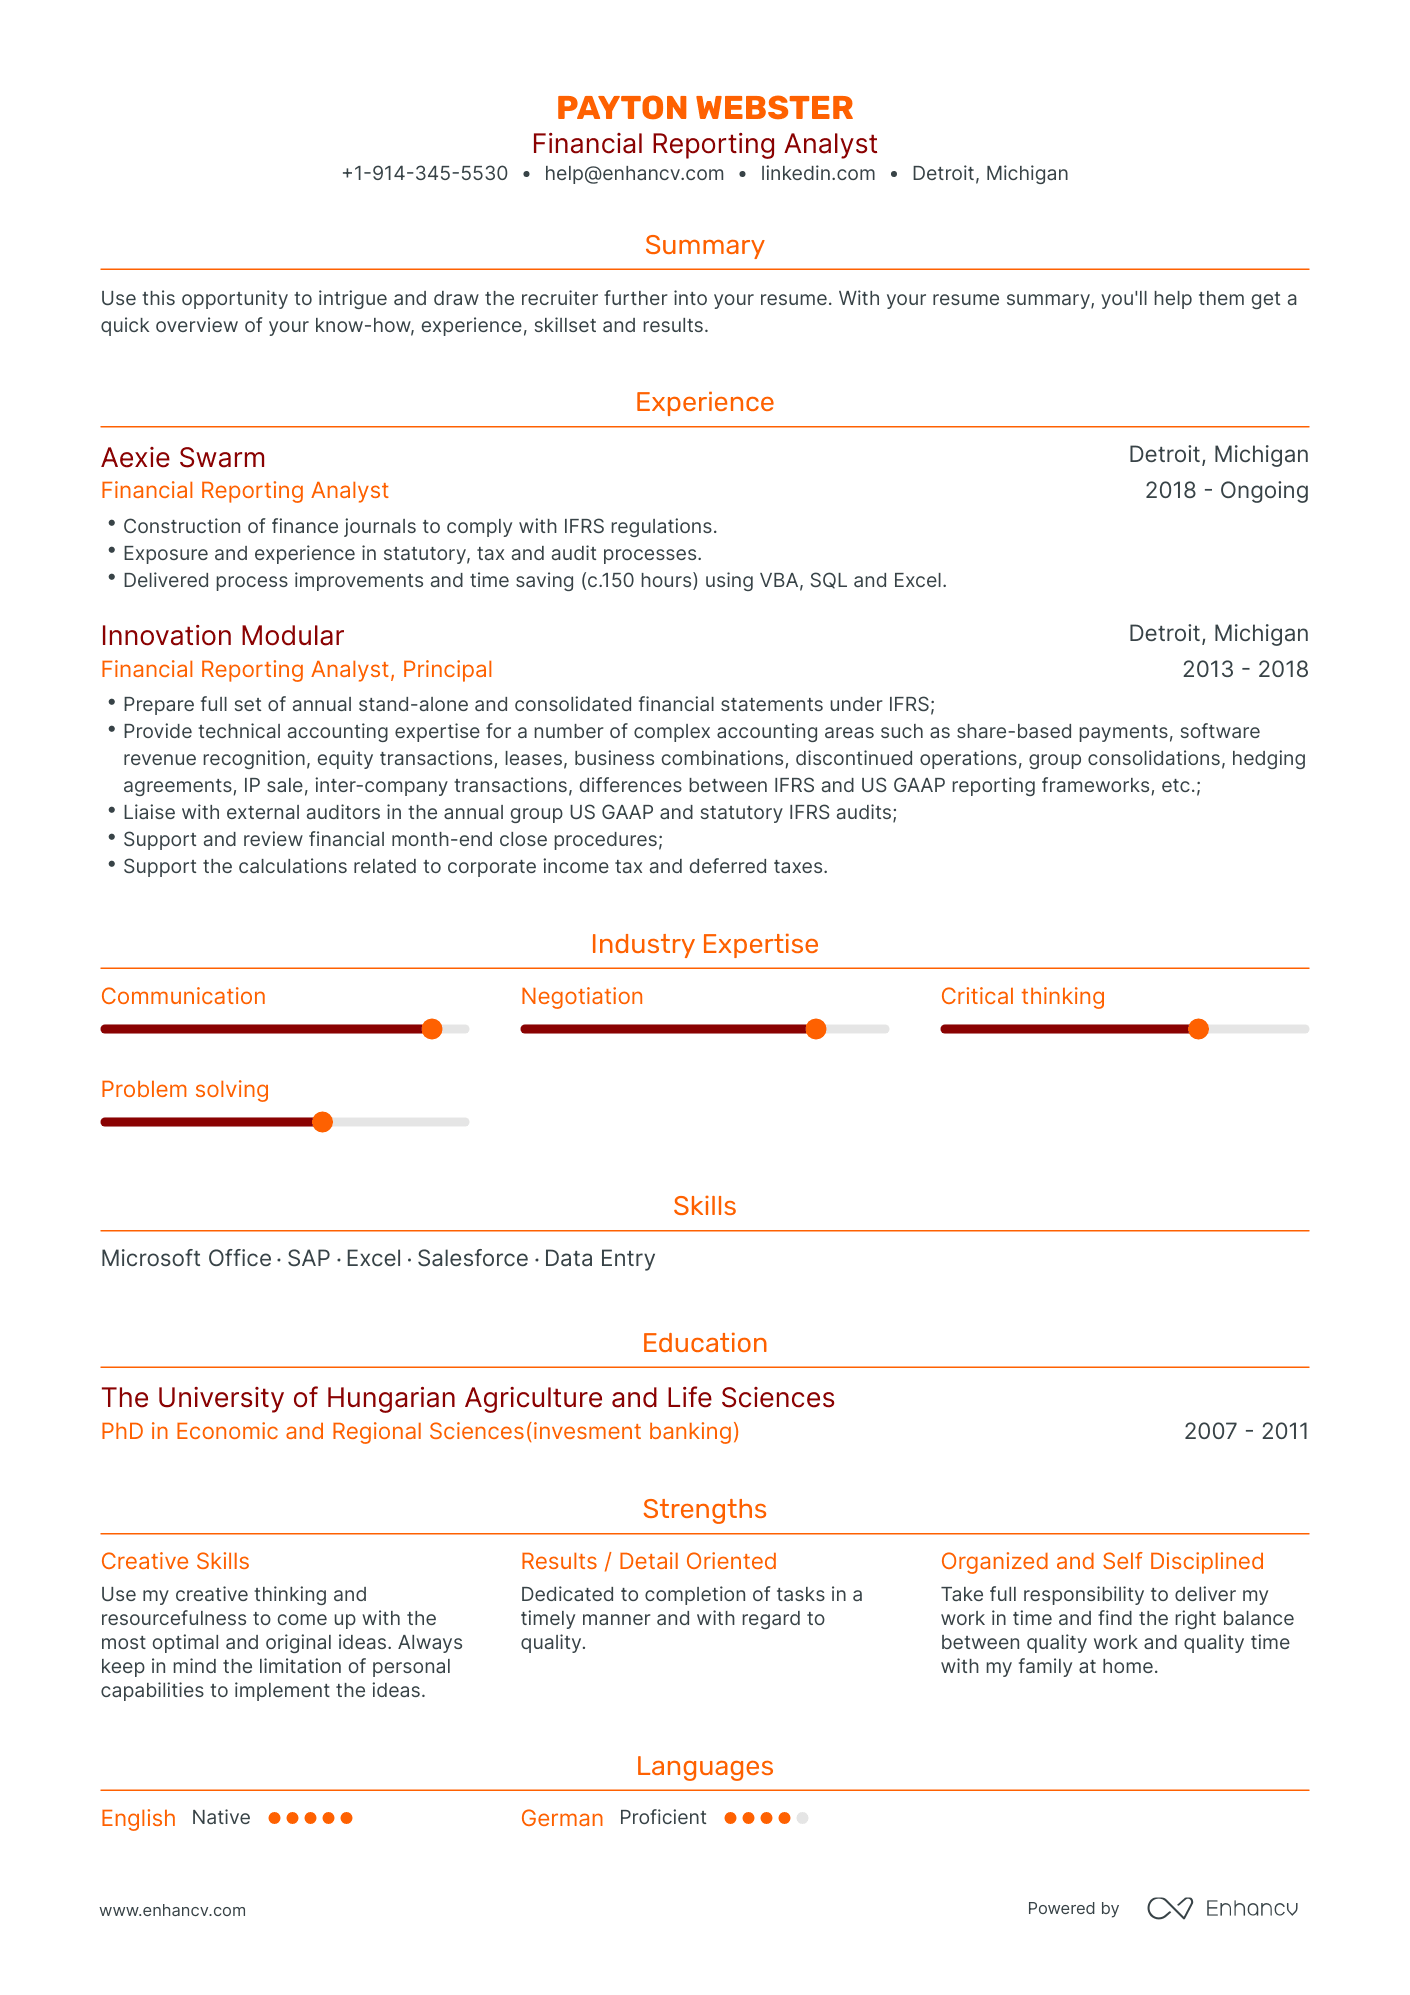 Traditional Financial Reporting Analyst Resume Template